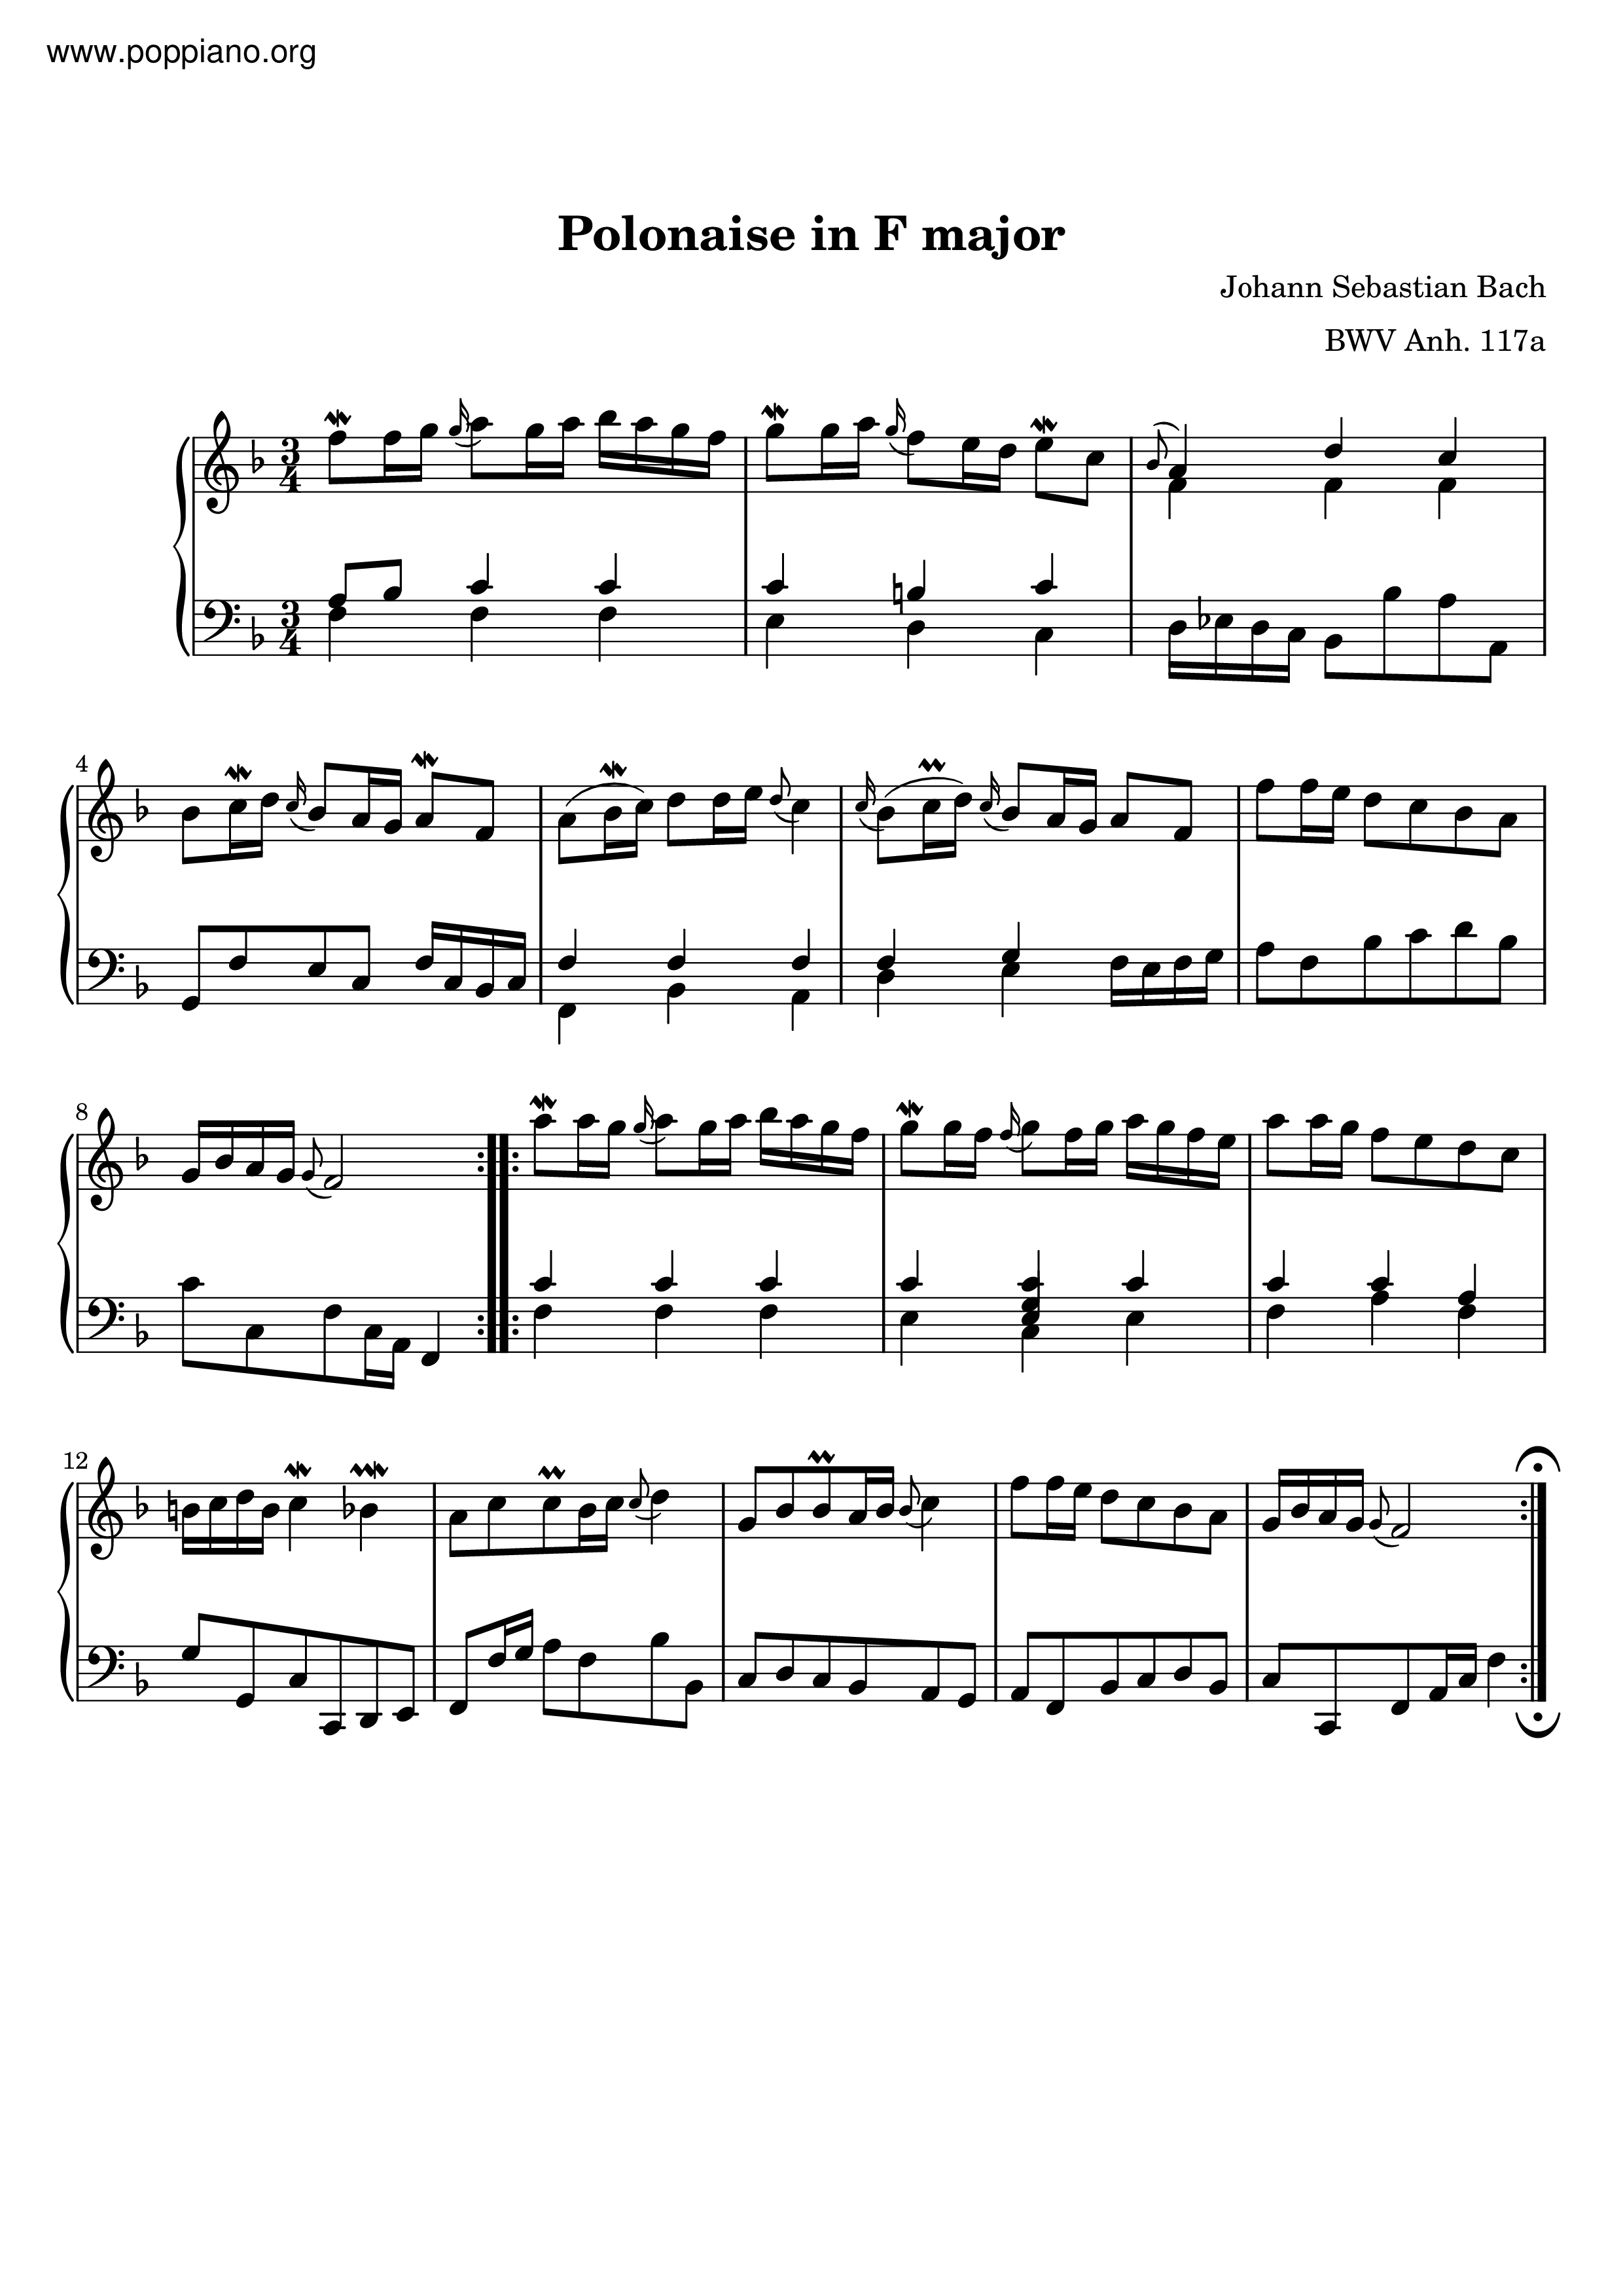 Polonaise In F Major, BWV Anh. 117a Score